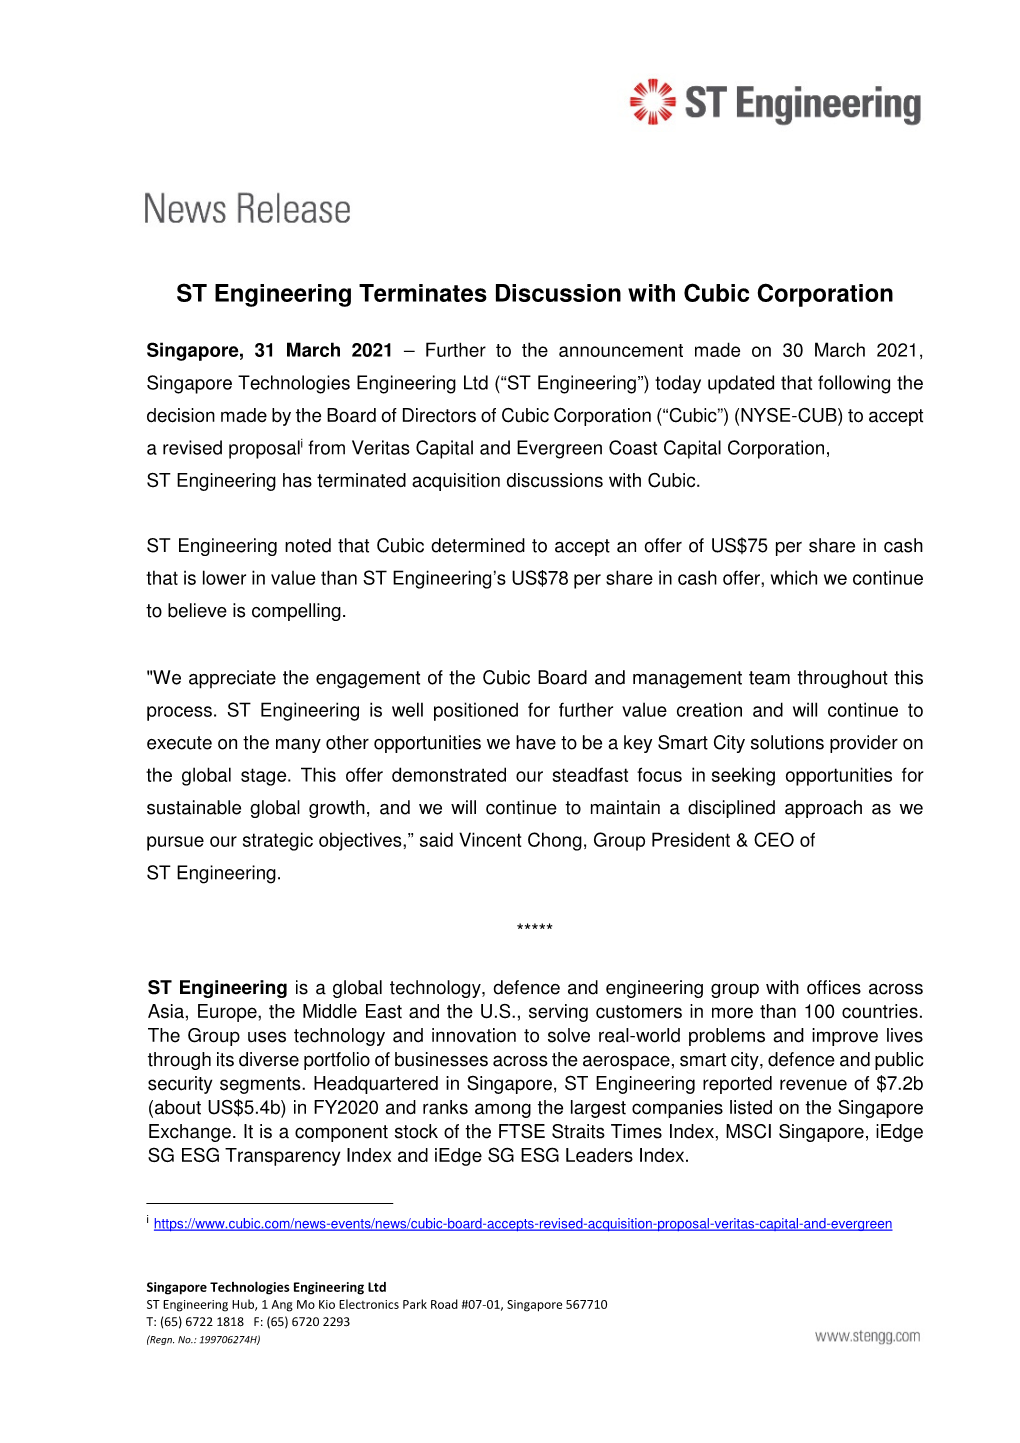 ST Engineering Terminates Discussion with Cubic Corporation